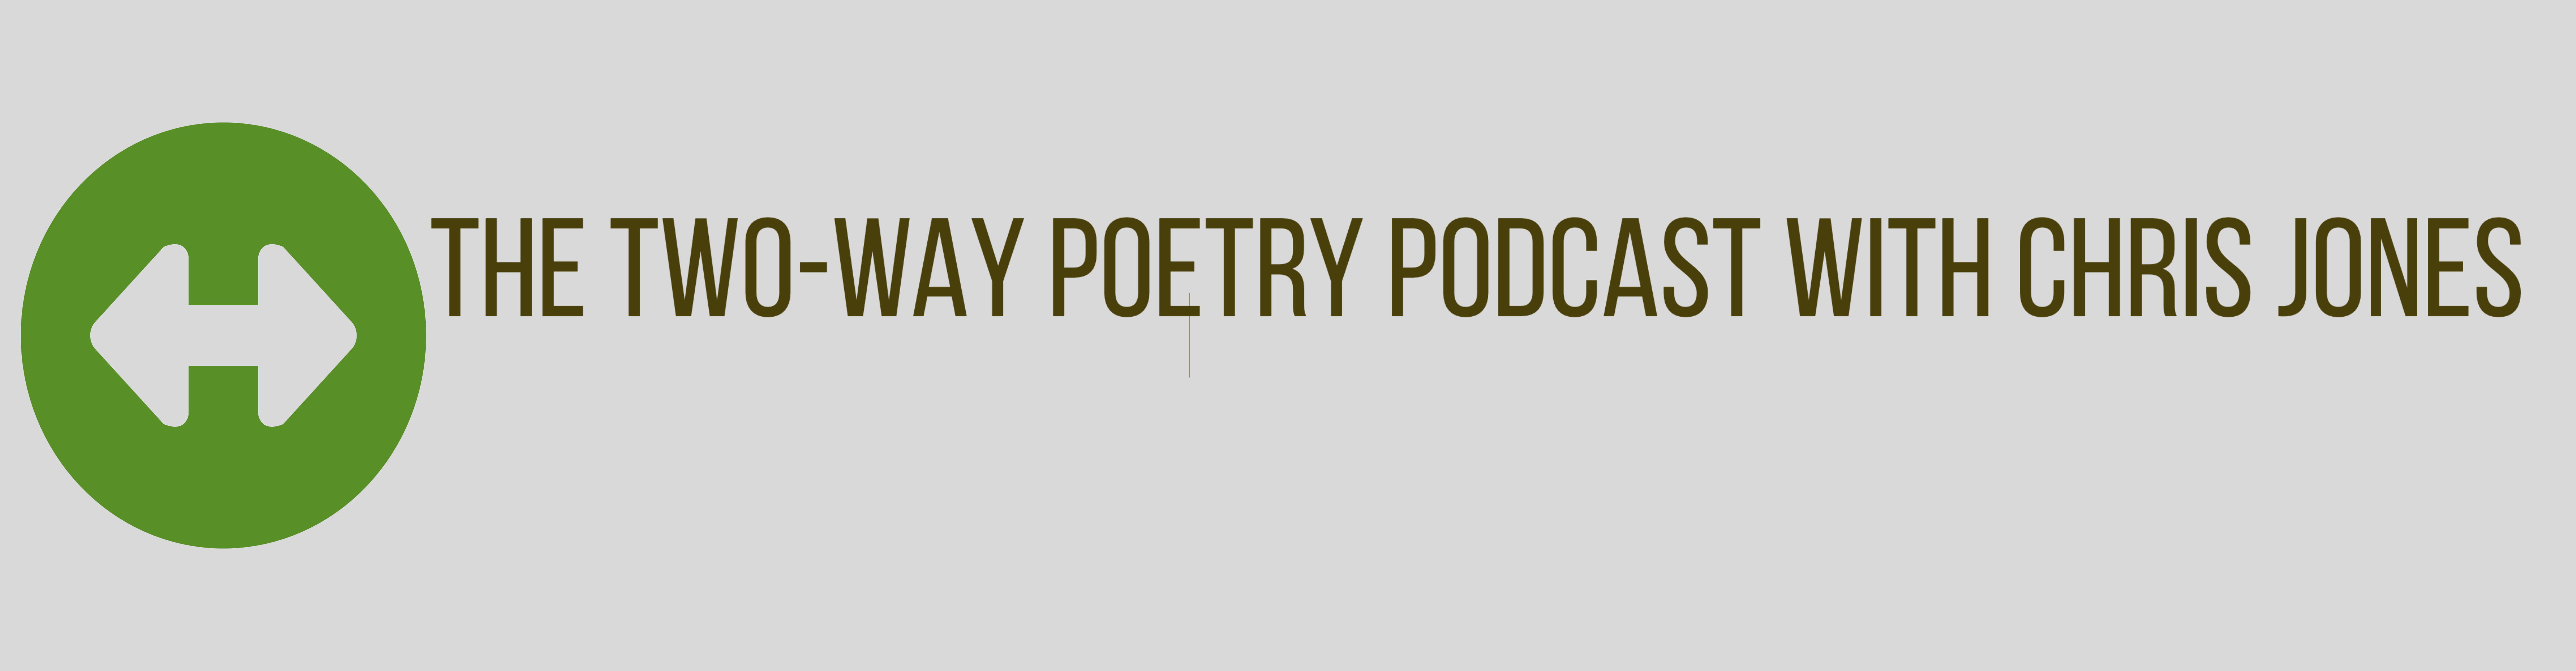 The Two-Way Poetry Podcast